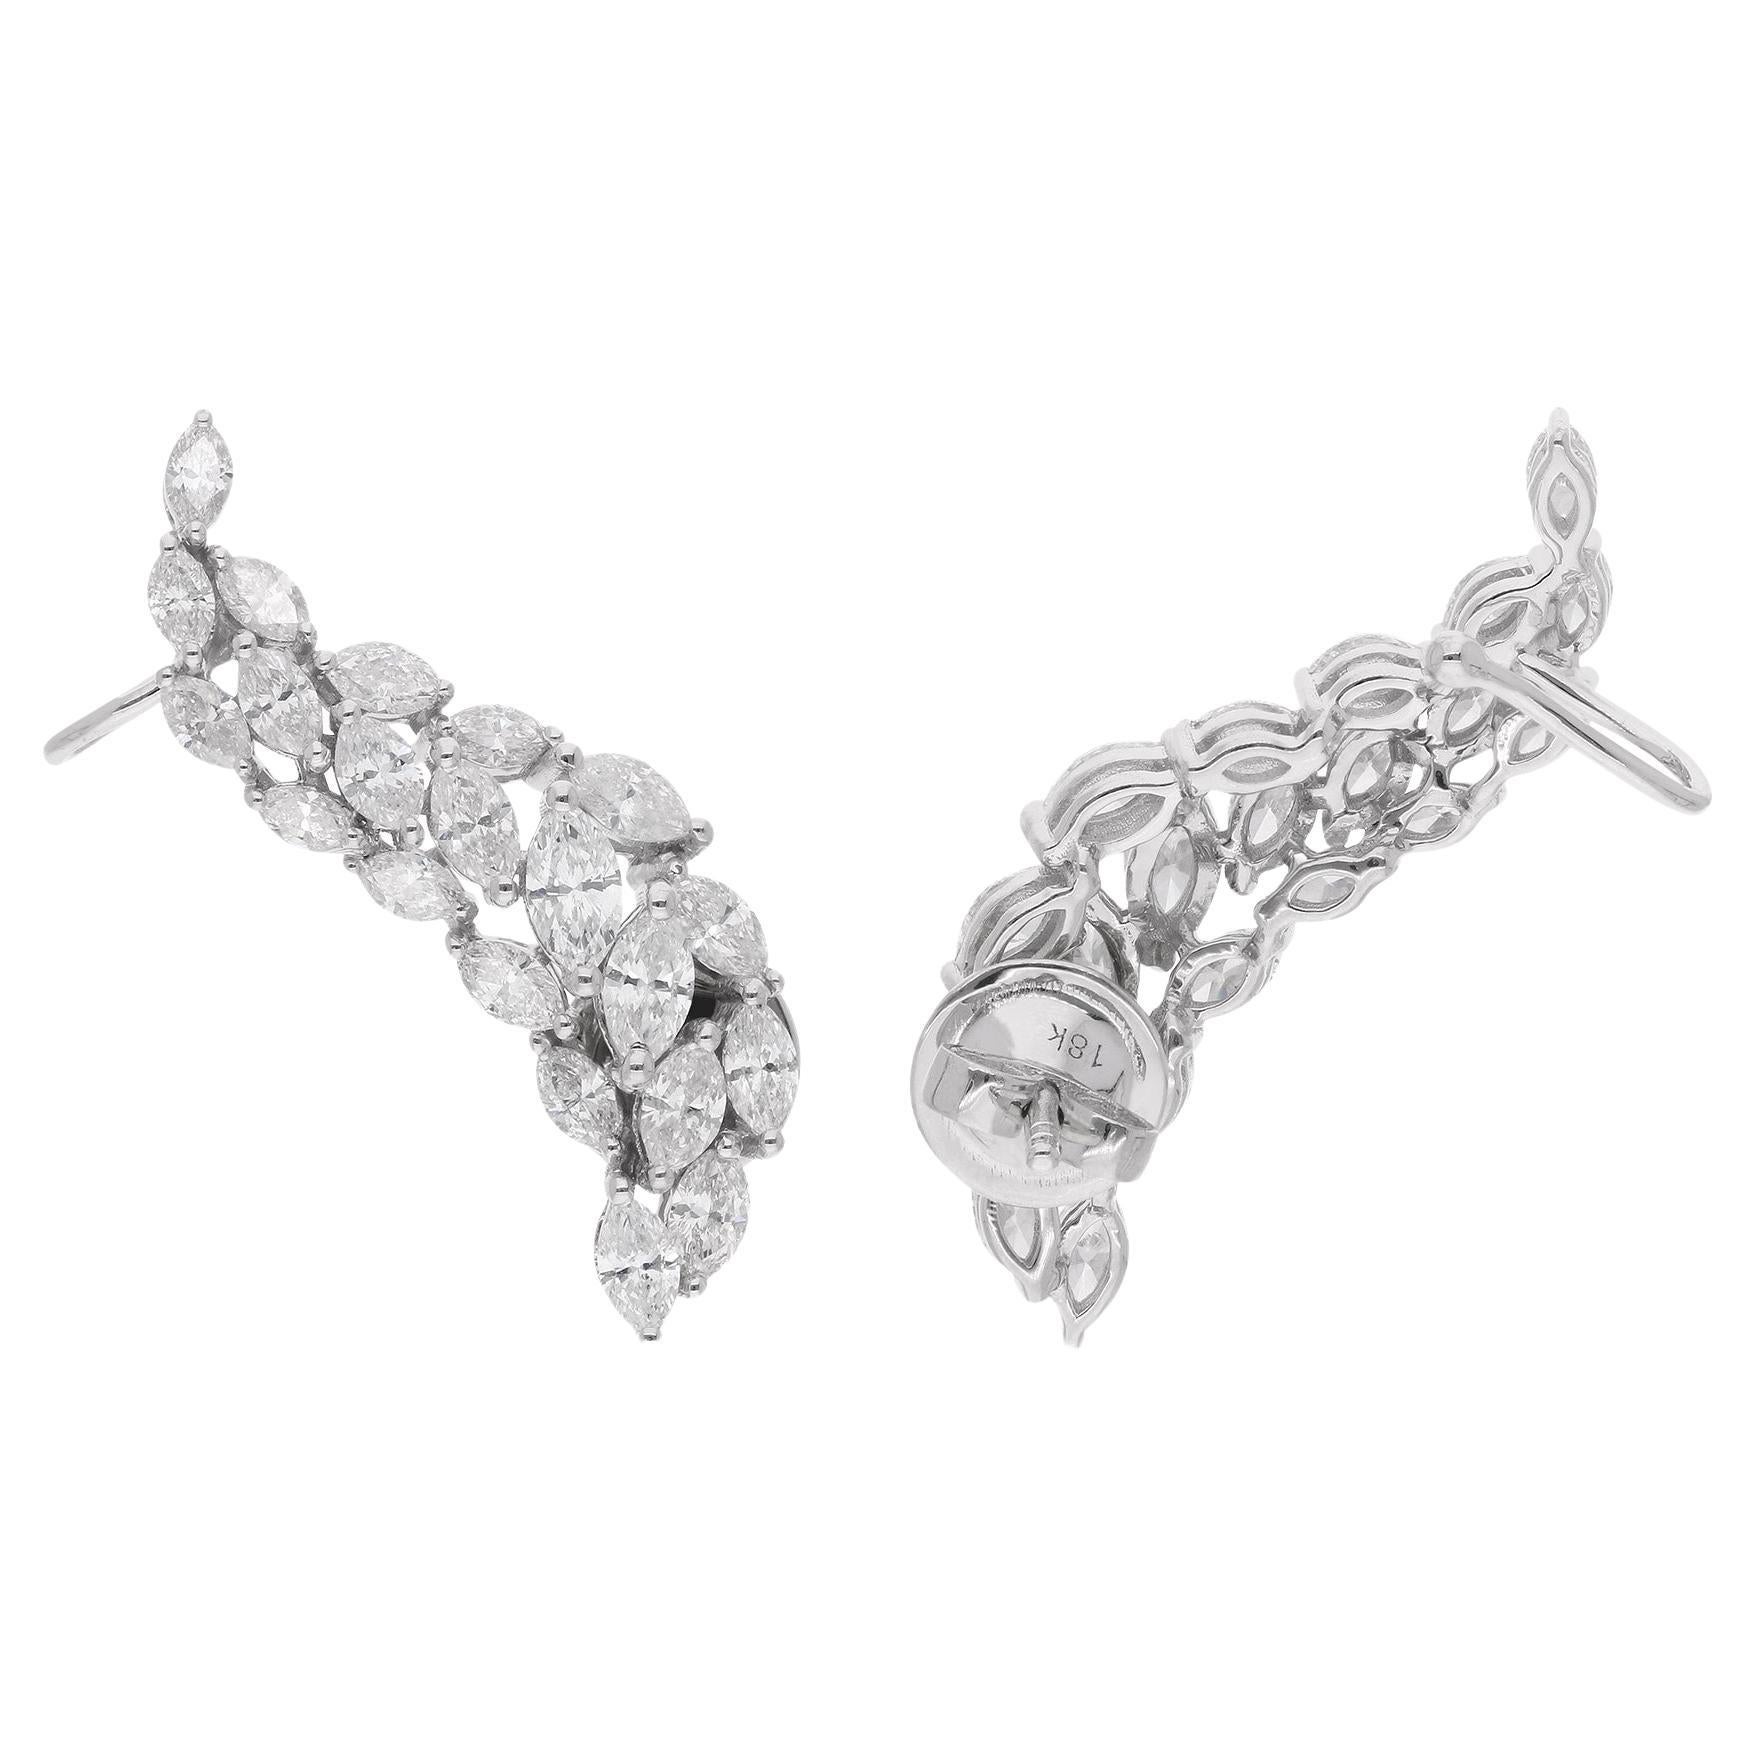 Real 2.91 Carat Marquise Diamond Ear Cuff Earrings 18 Karat White Gold Jewelry For Sale